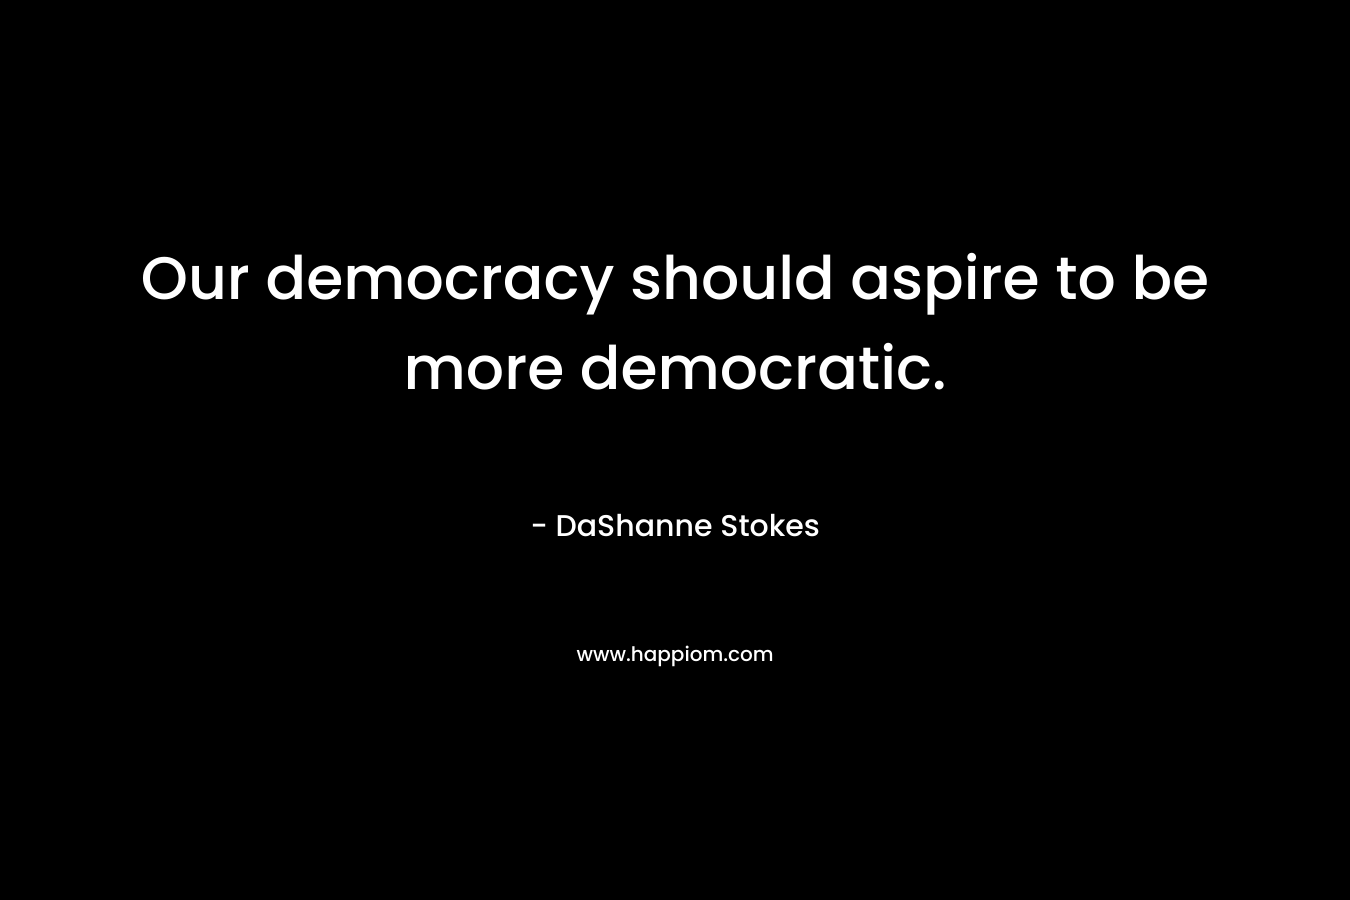 Our democracy should aspire to be more democratic.